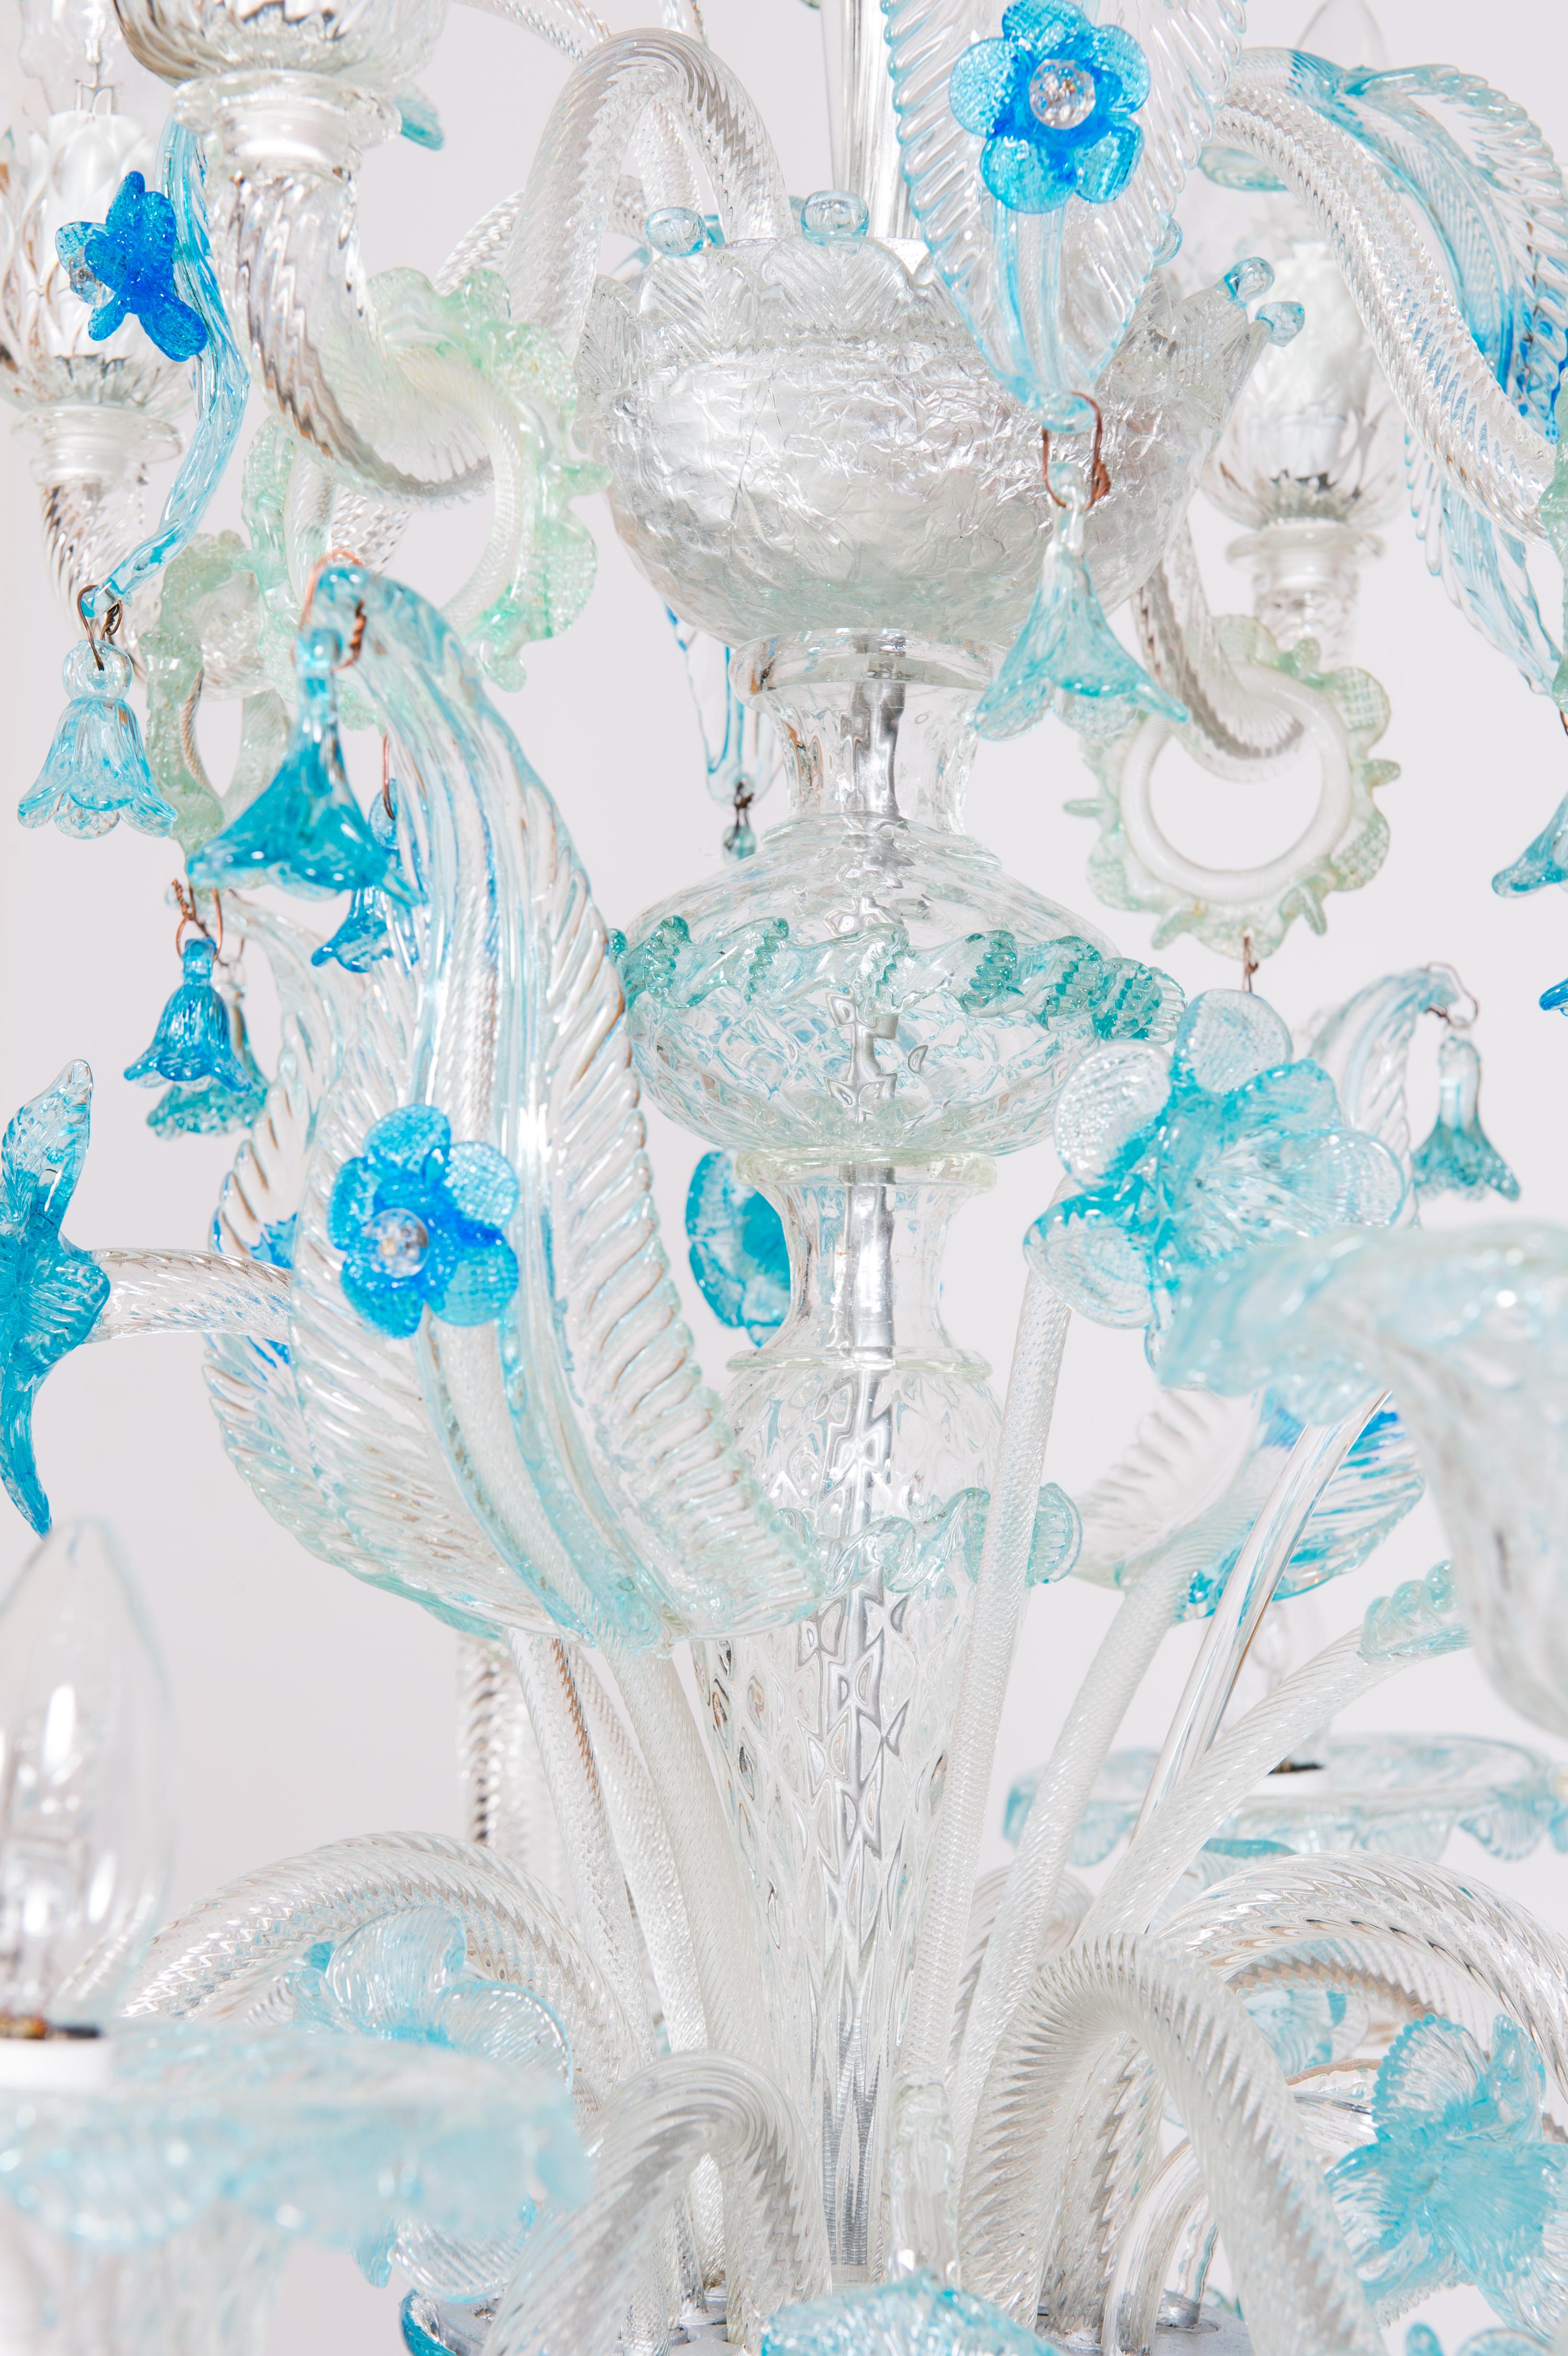 Double Tiered Murano Glass Chandelier in vivid Blue Floral Patterns 1990s Italy For Sale 4